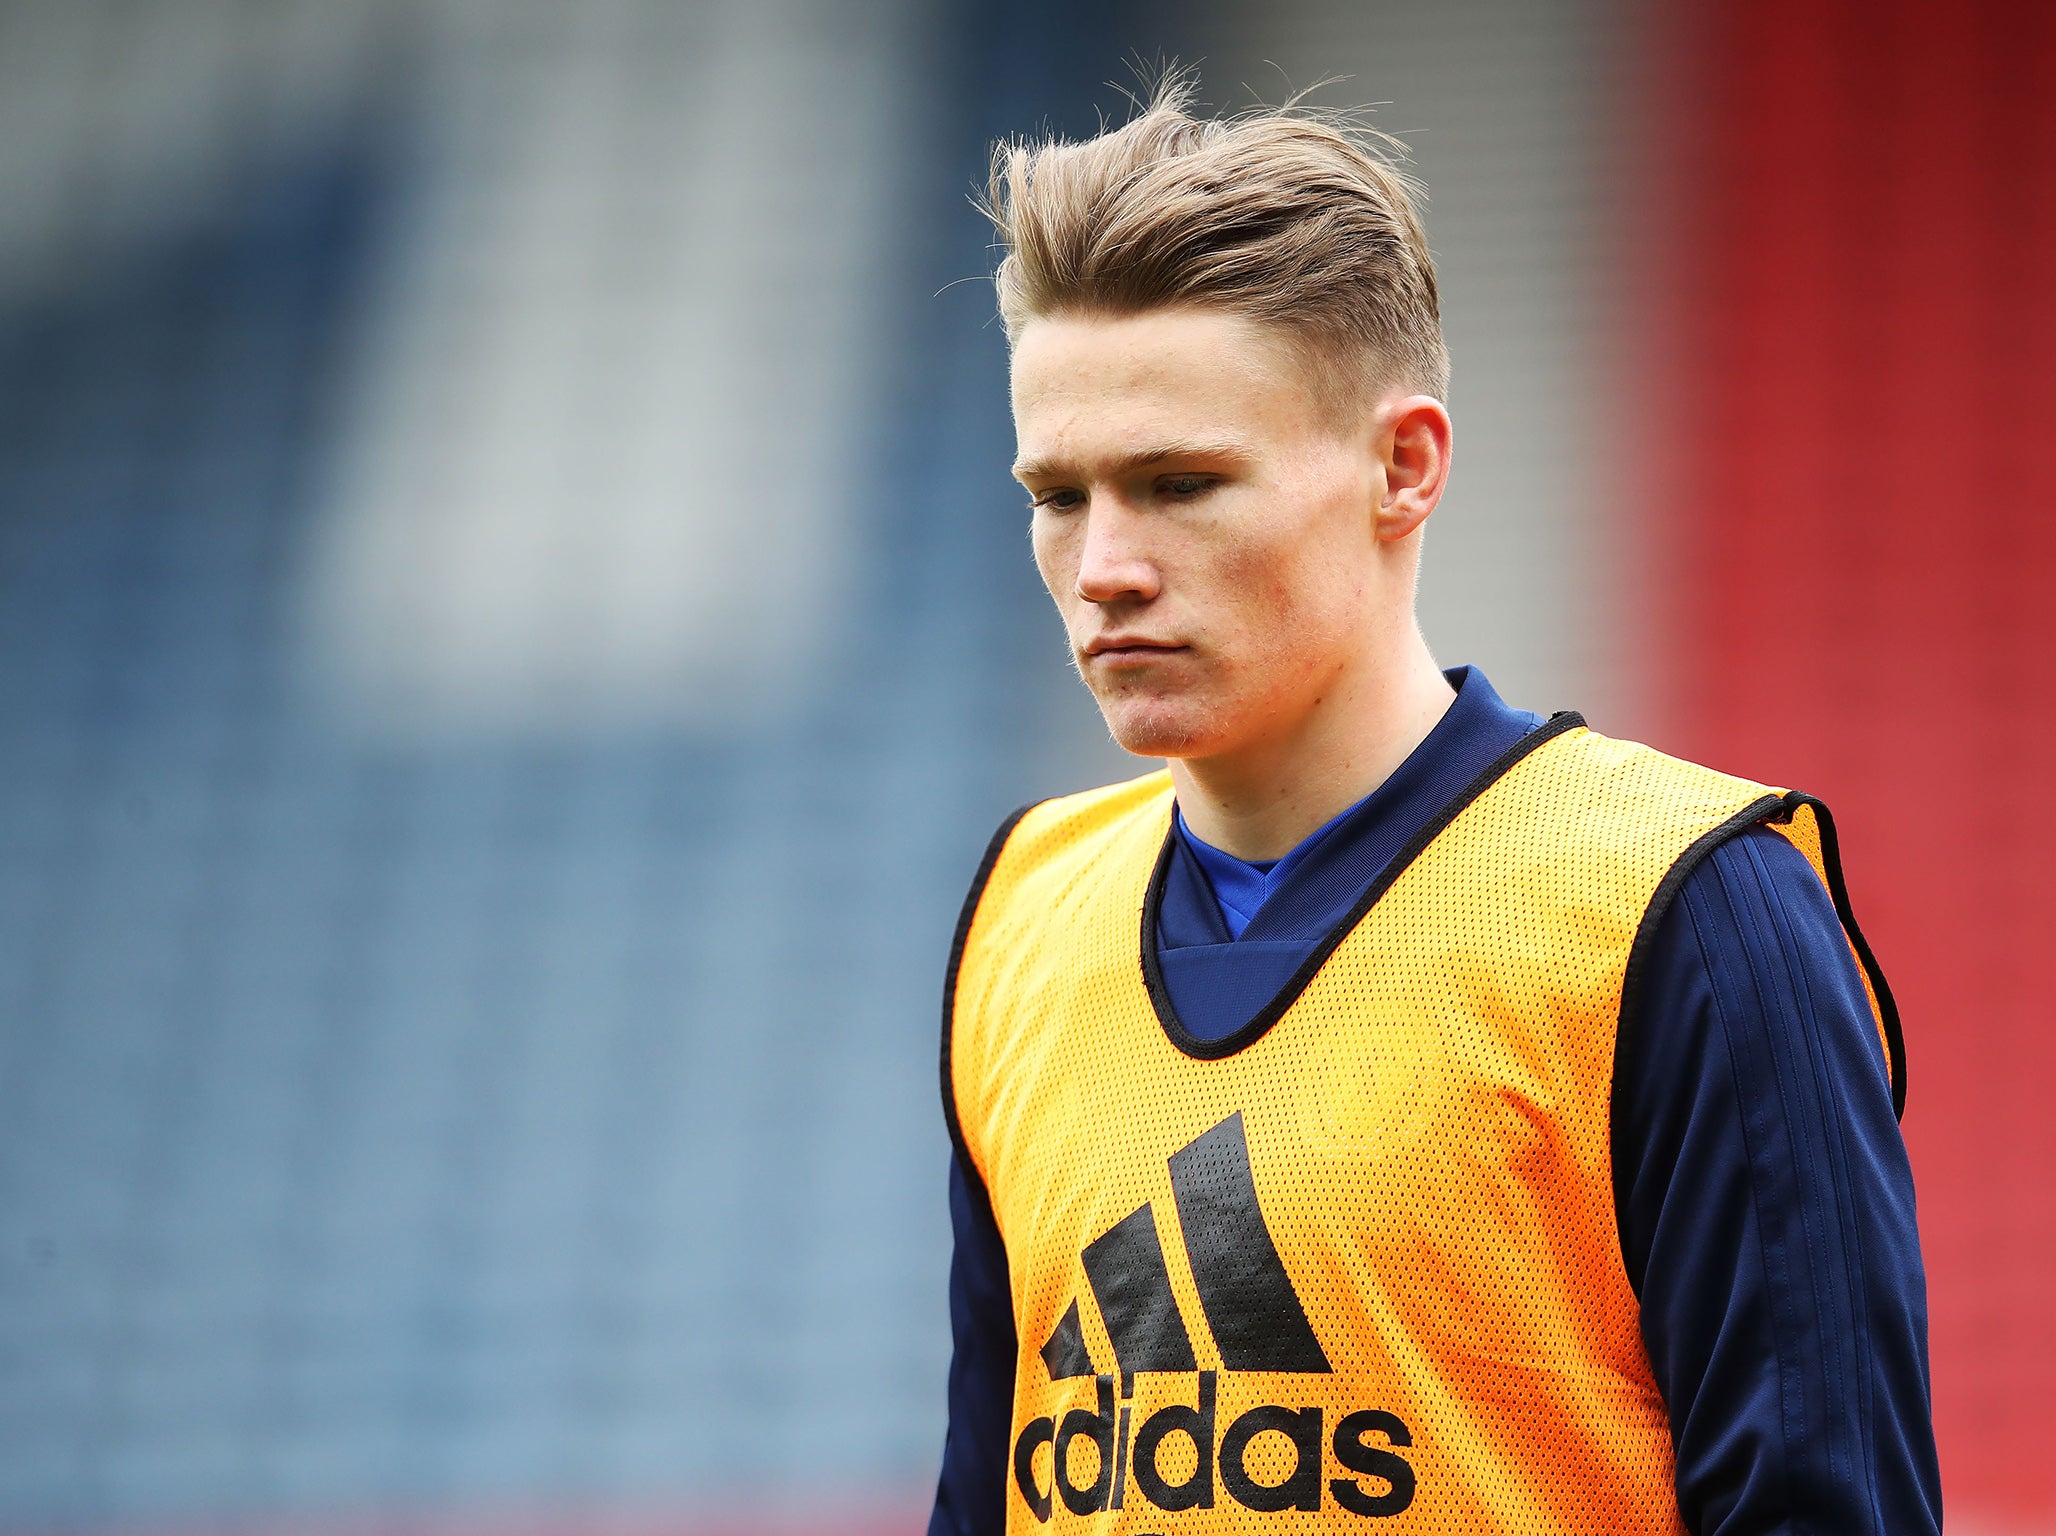 Scott McTominay is in line to make his international debut